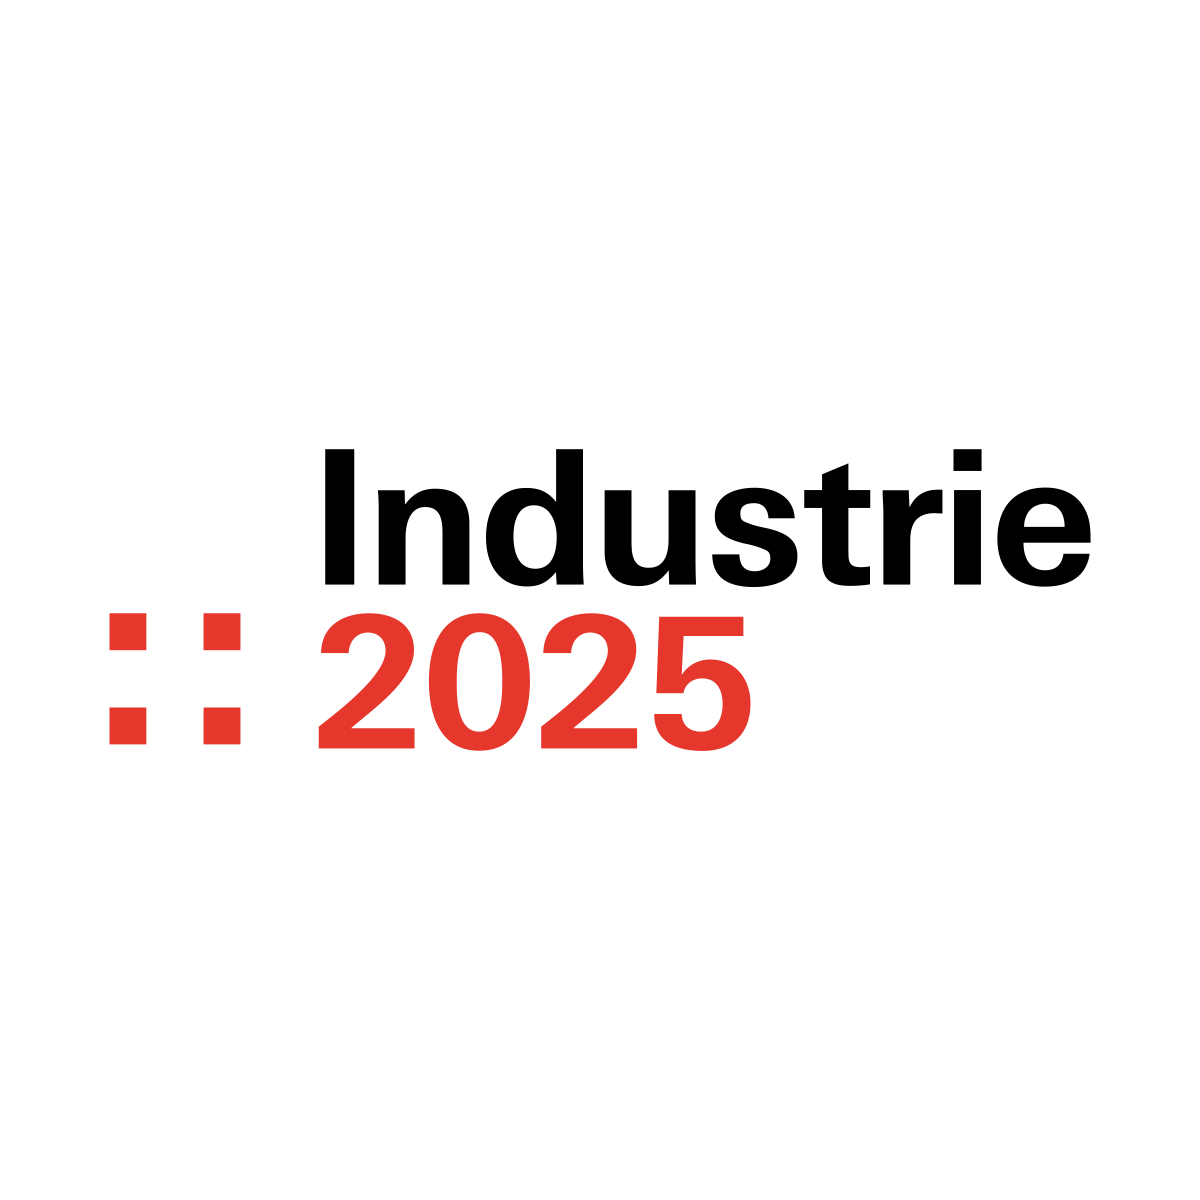 (c) Industrie2025.ch